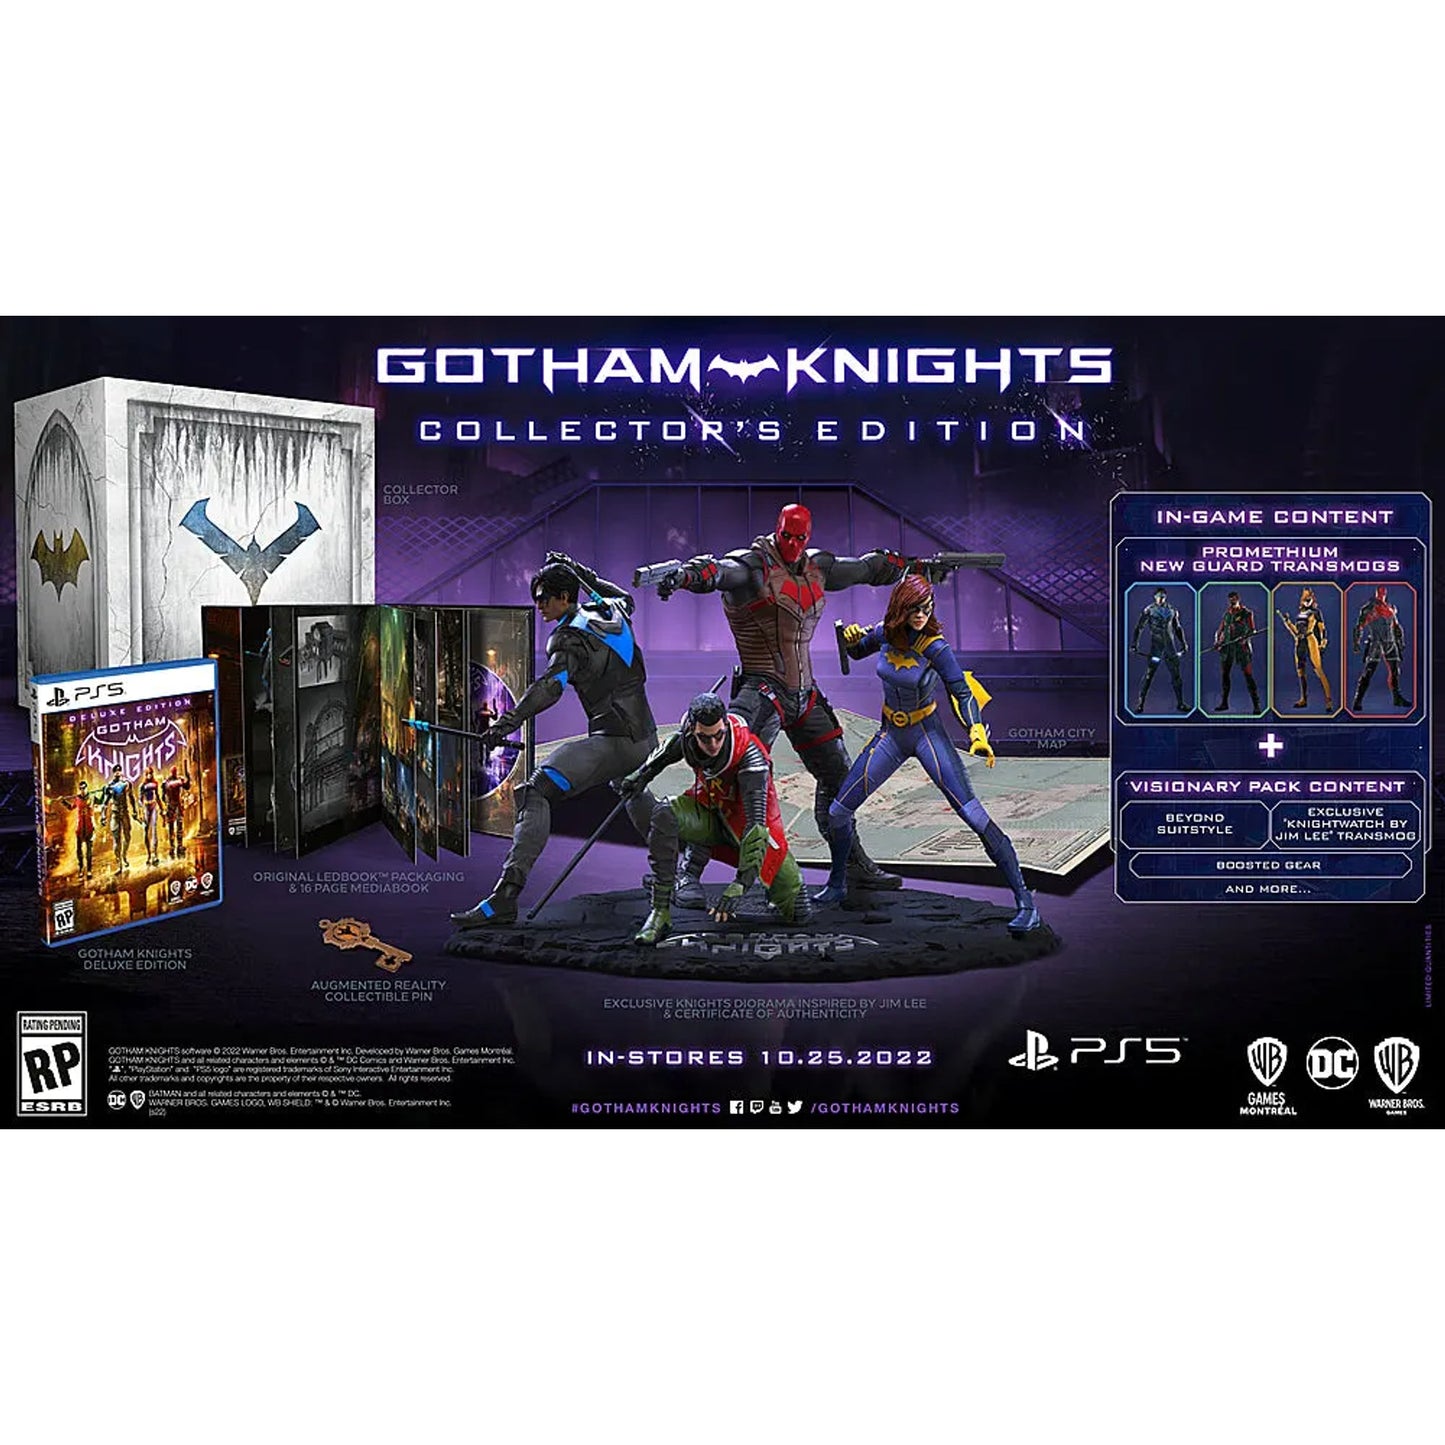 Gotham Knights Collector's Edition - PlayStation 5 - Release - 10/25/2022